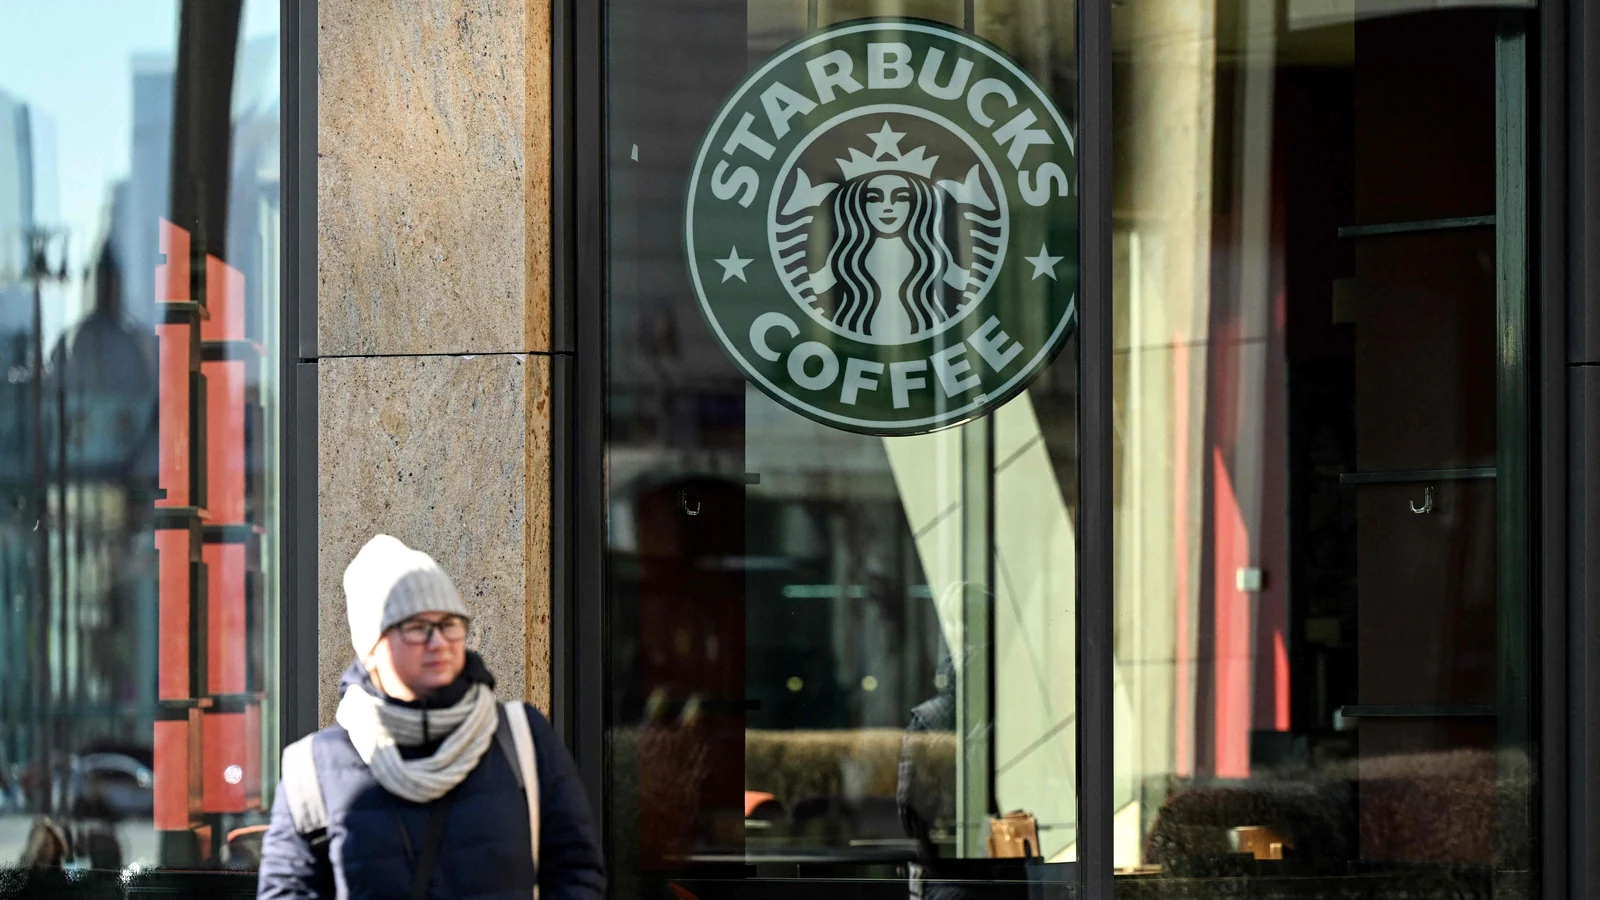 Starbucks to completely exit Russia as Ukraine war drags on